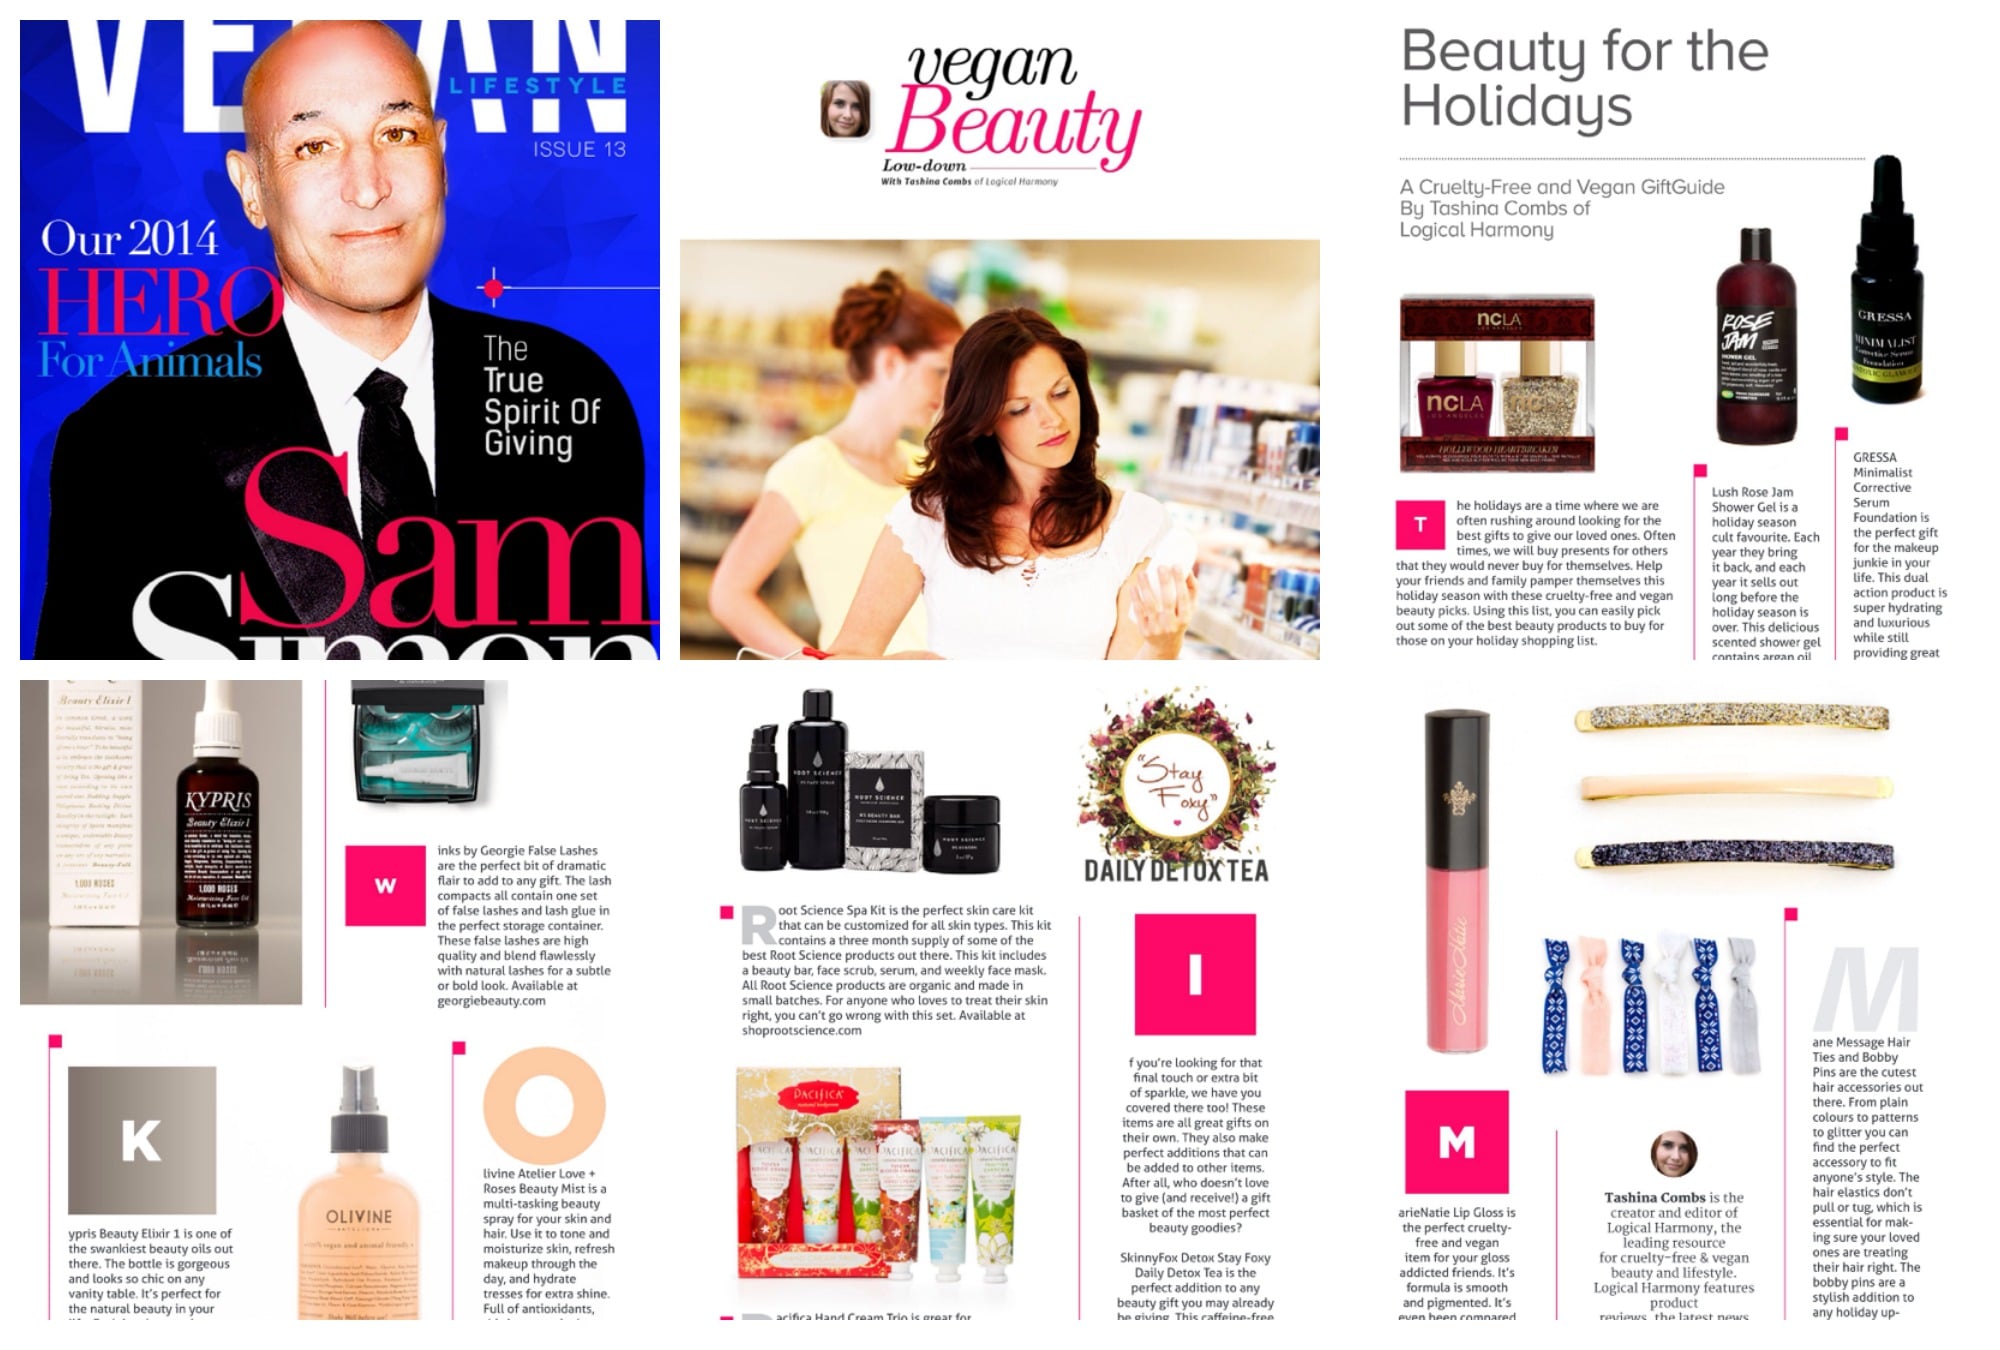 Beauty for the Holidays - A Cruelty Free & Vegan Gift Guide in Vegan Lifestyle Magazine